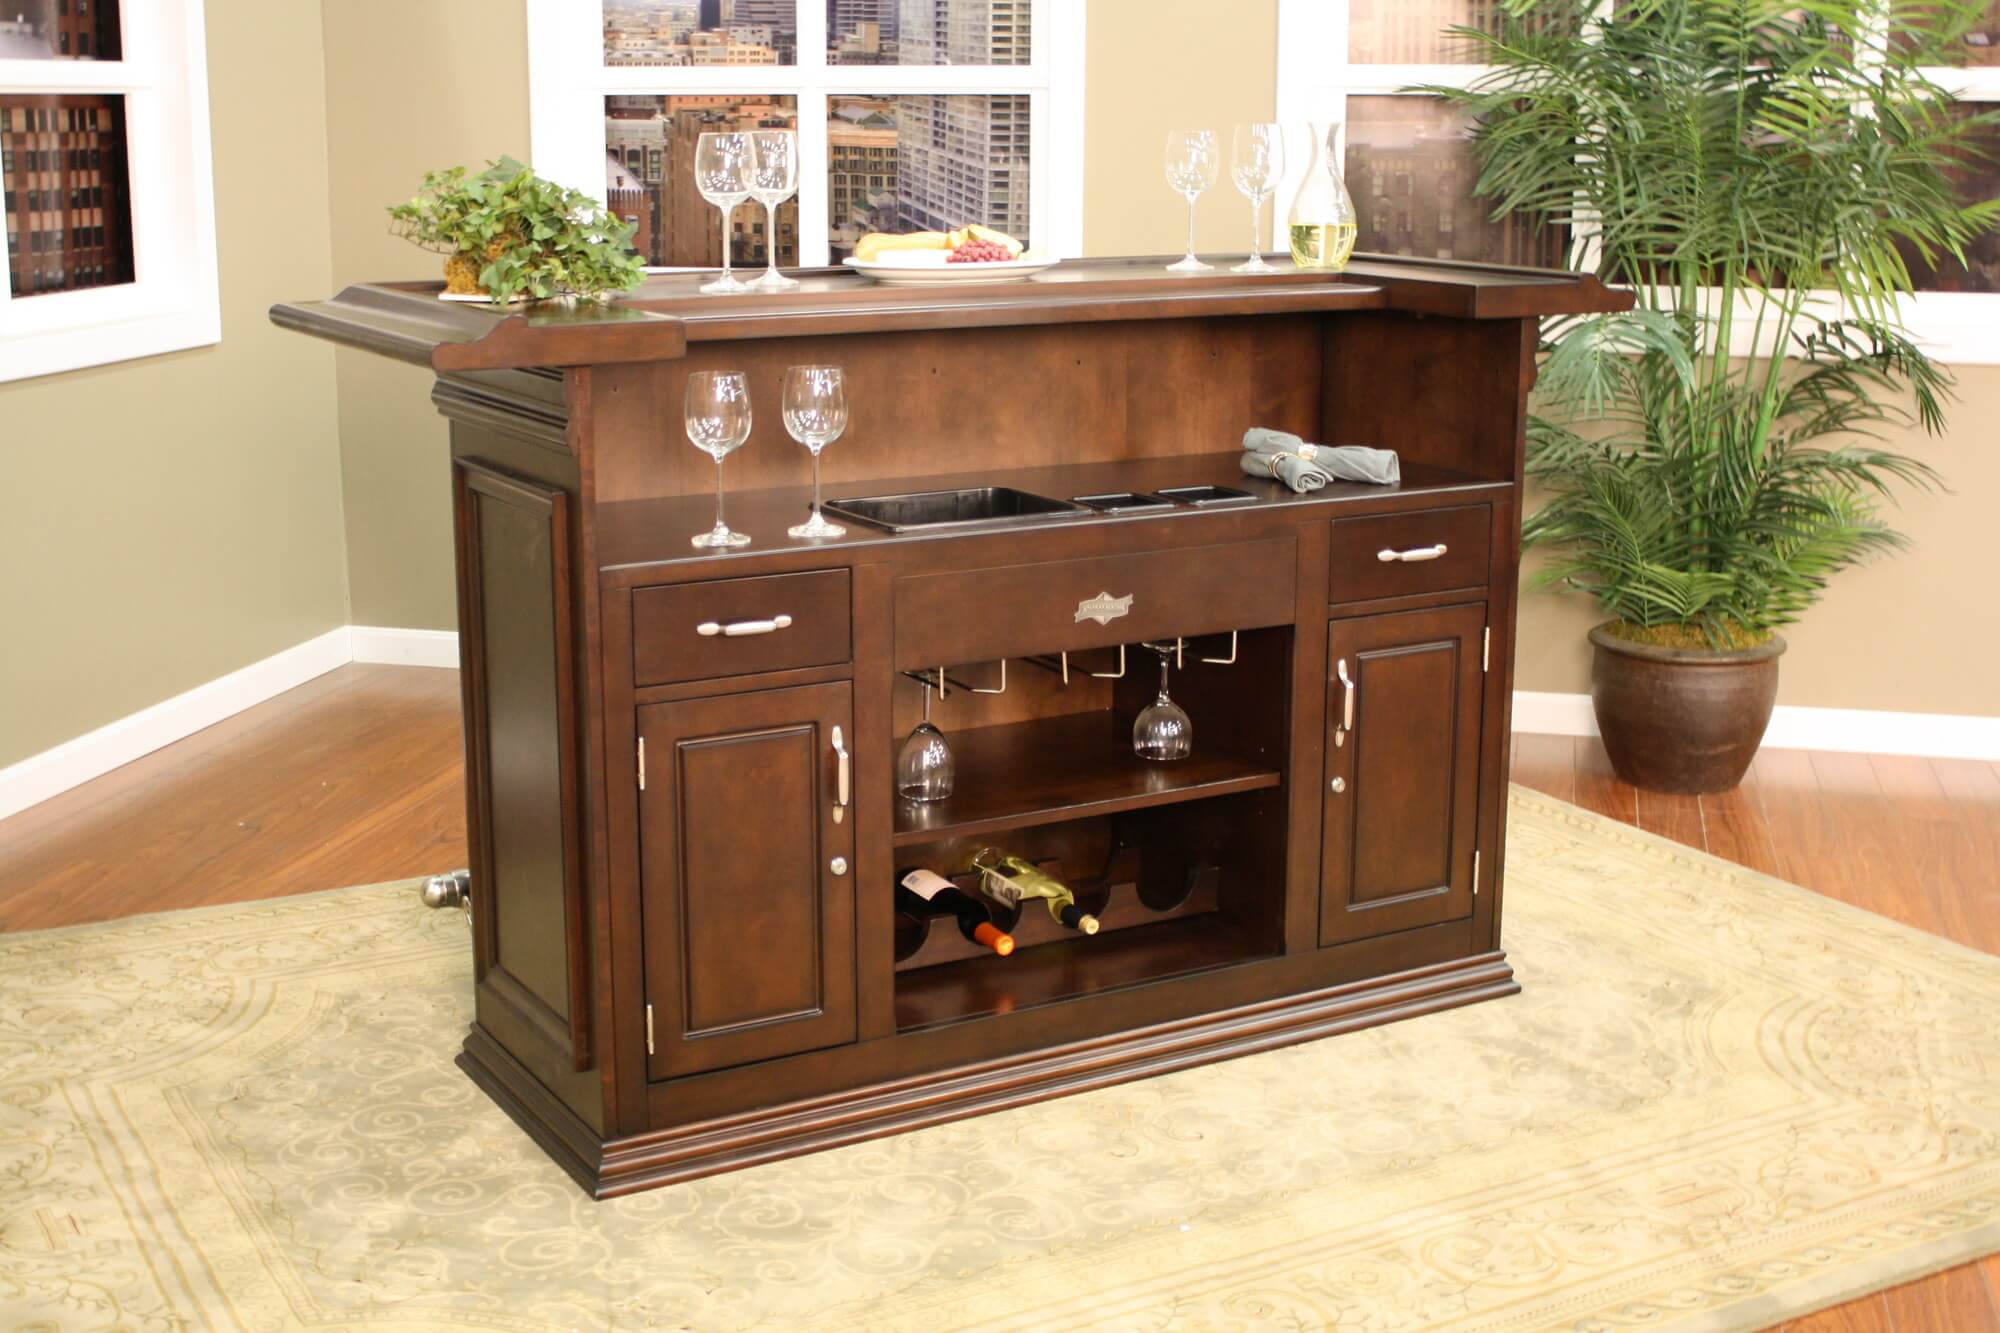 Back end view - For a smaller design, this home bar offers some great  features